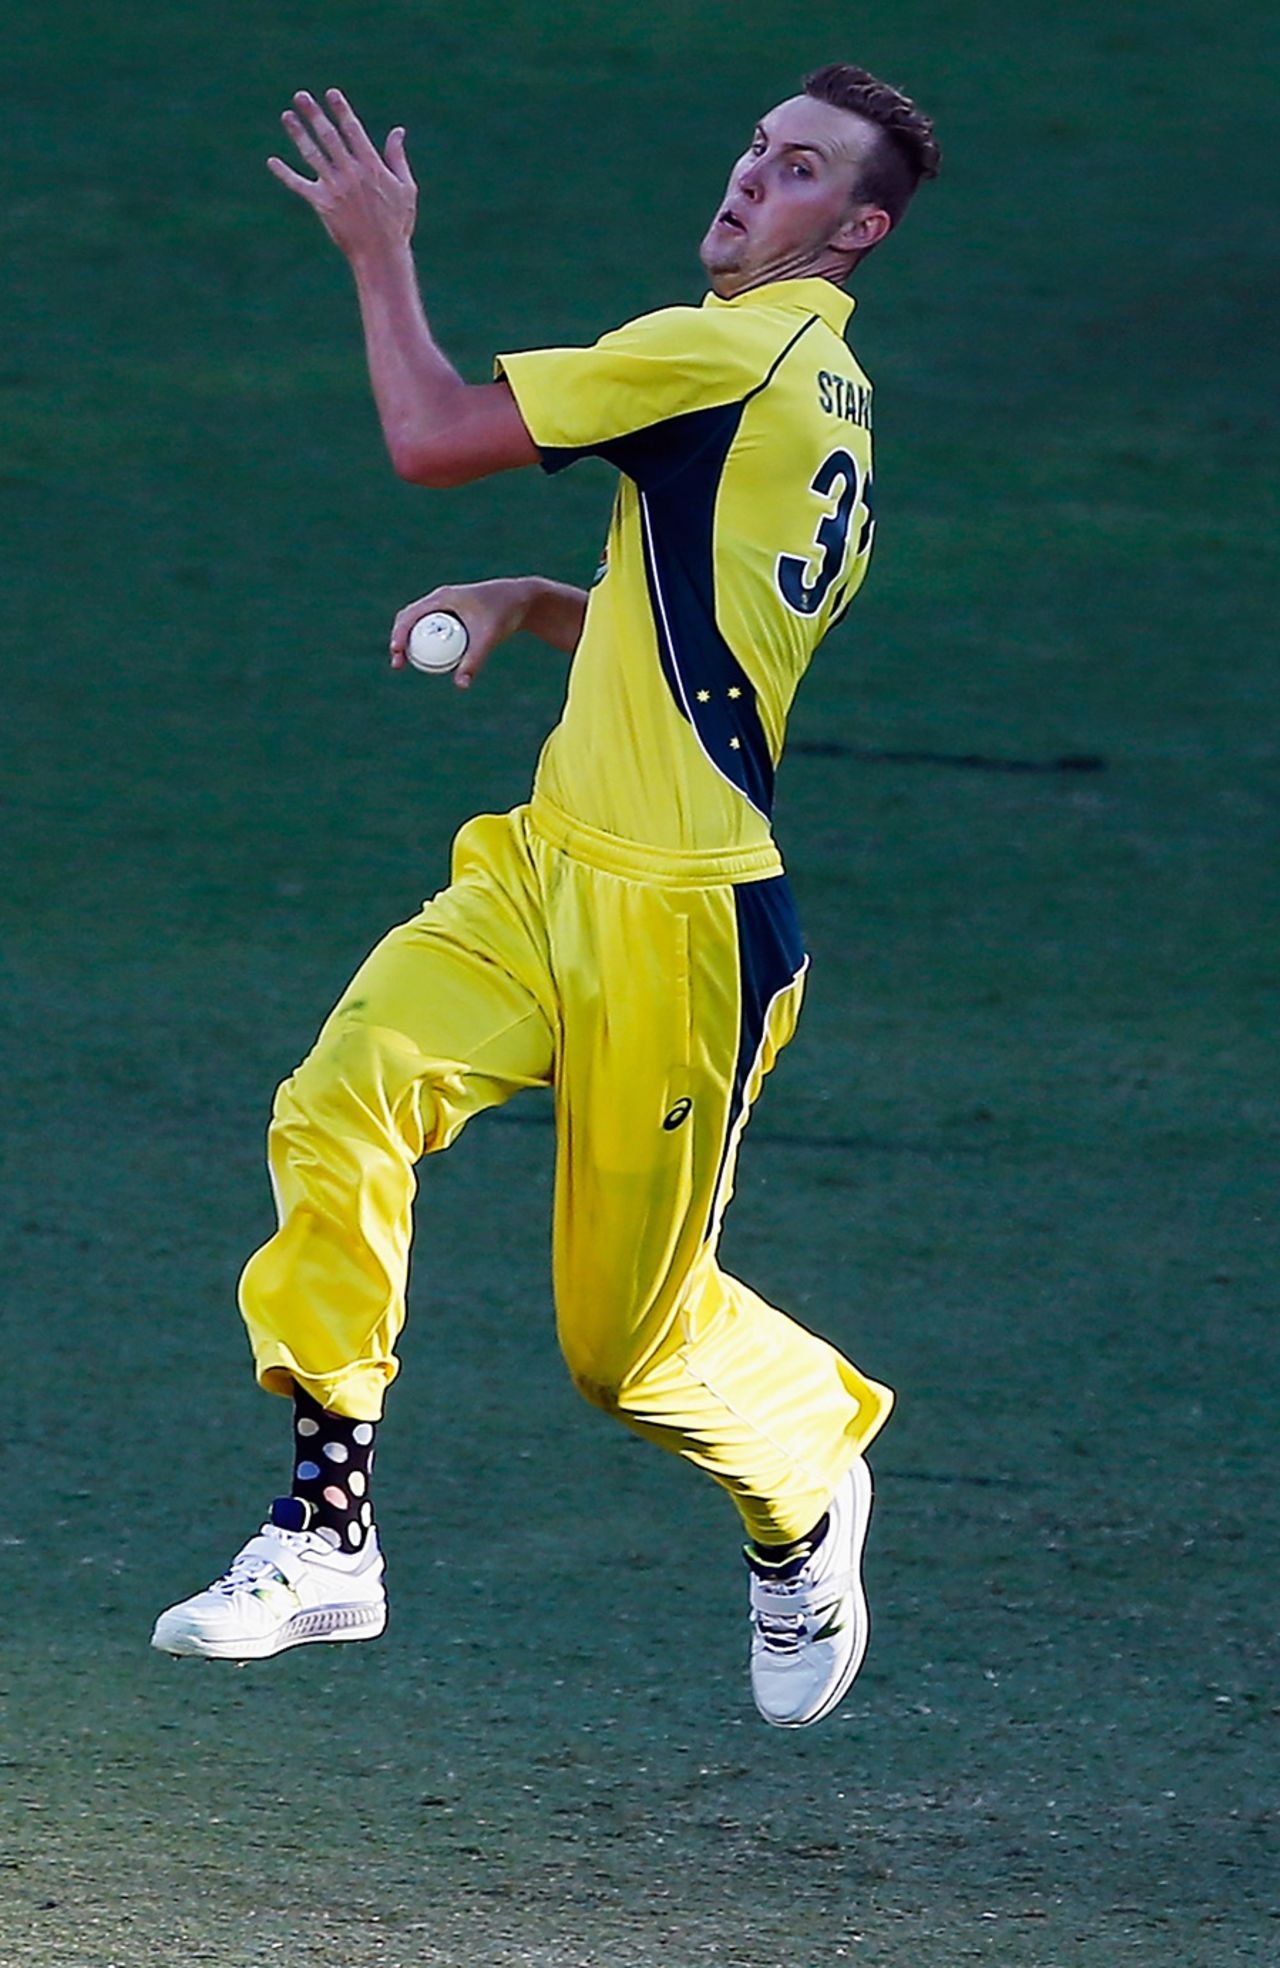 Billy Stanlake shows off his snazzy socks in his pre-delivery jump, Australia v Pakistan, 1st ODI, Brisbane, January 13, 2017